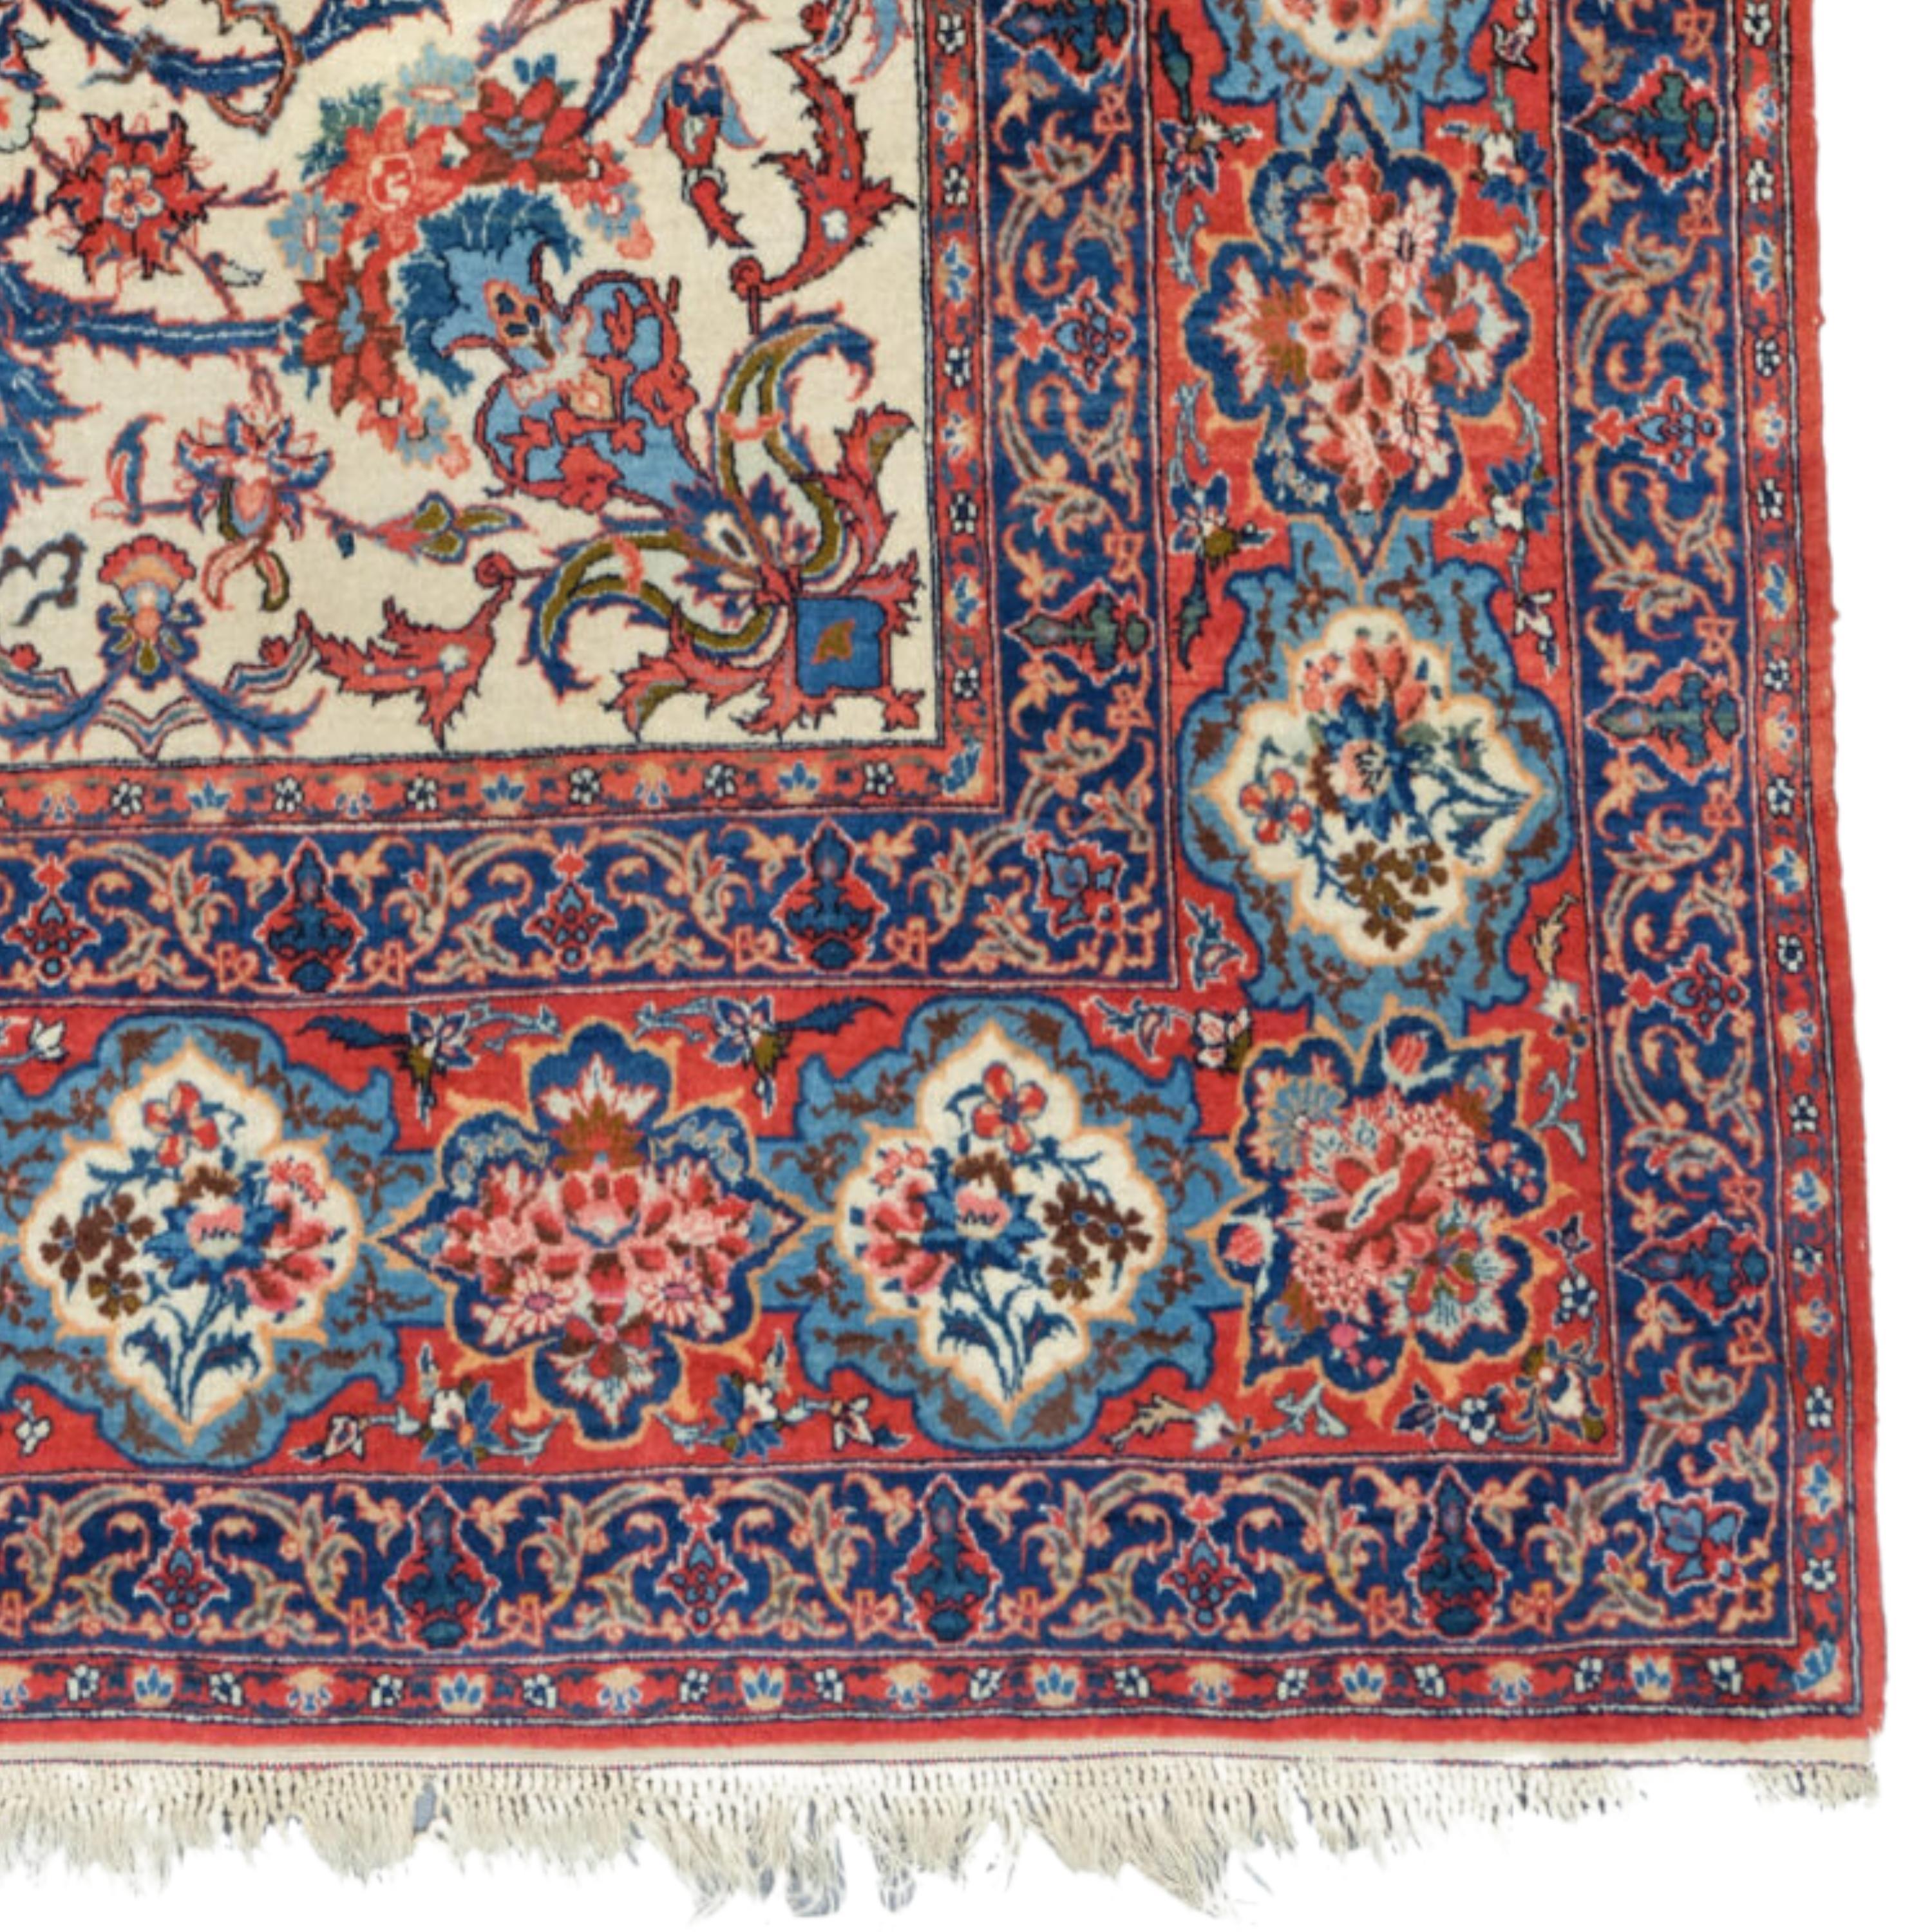 Wool Antique Isfahan Rug - Late of 19th Century Isfahan Rug, Antique Rugs For Sale